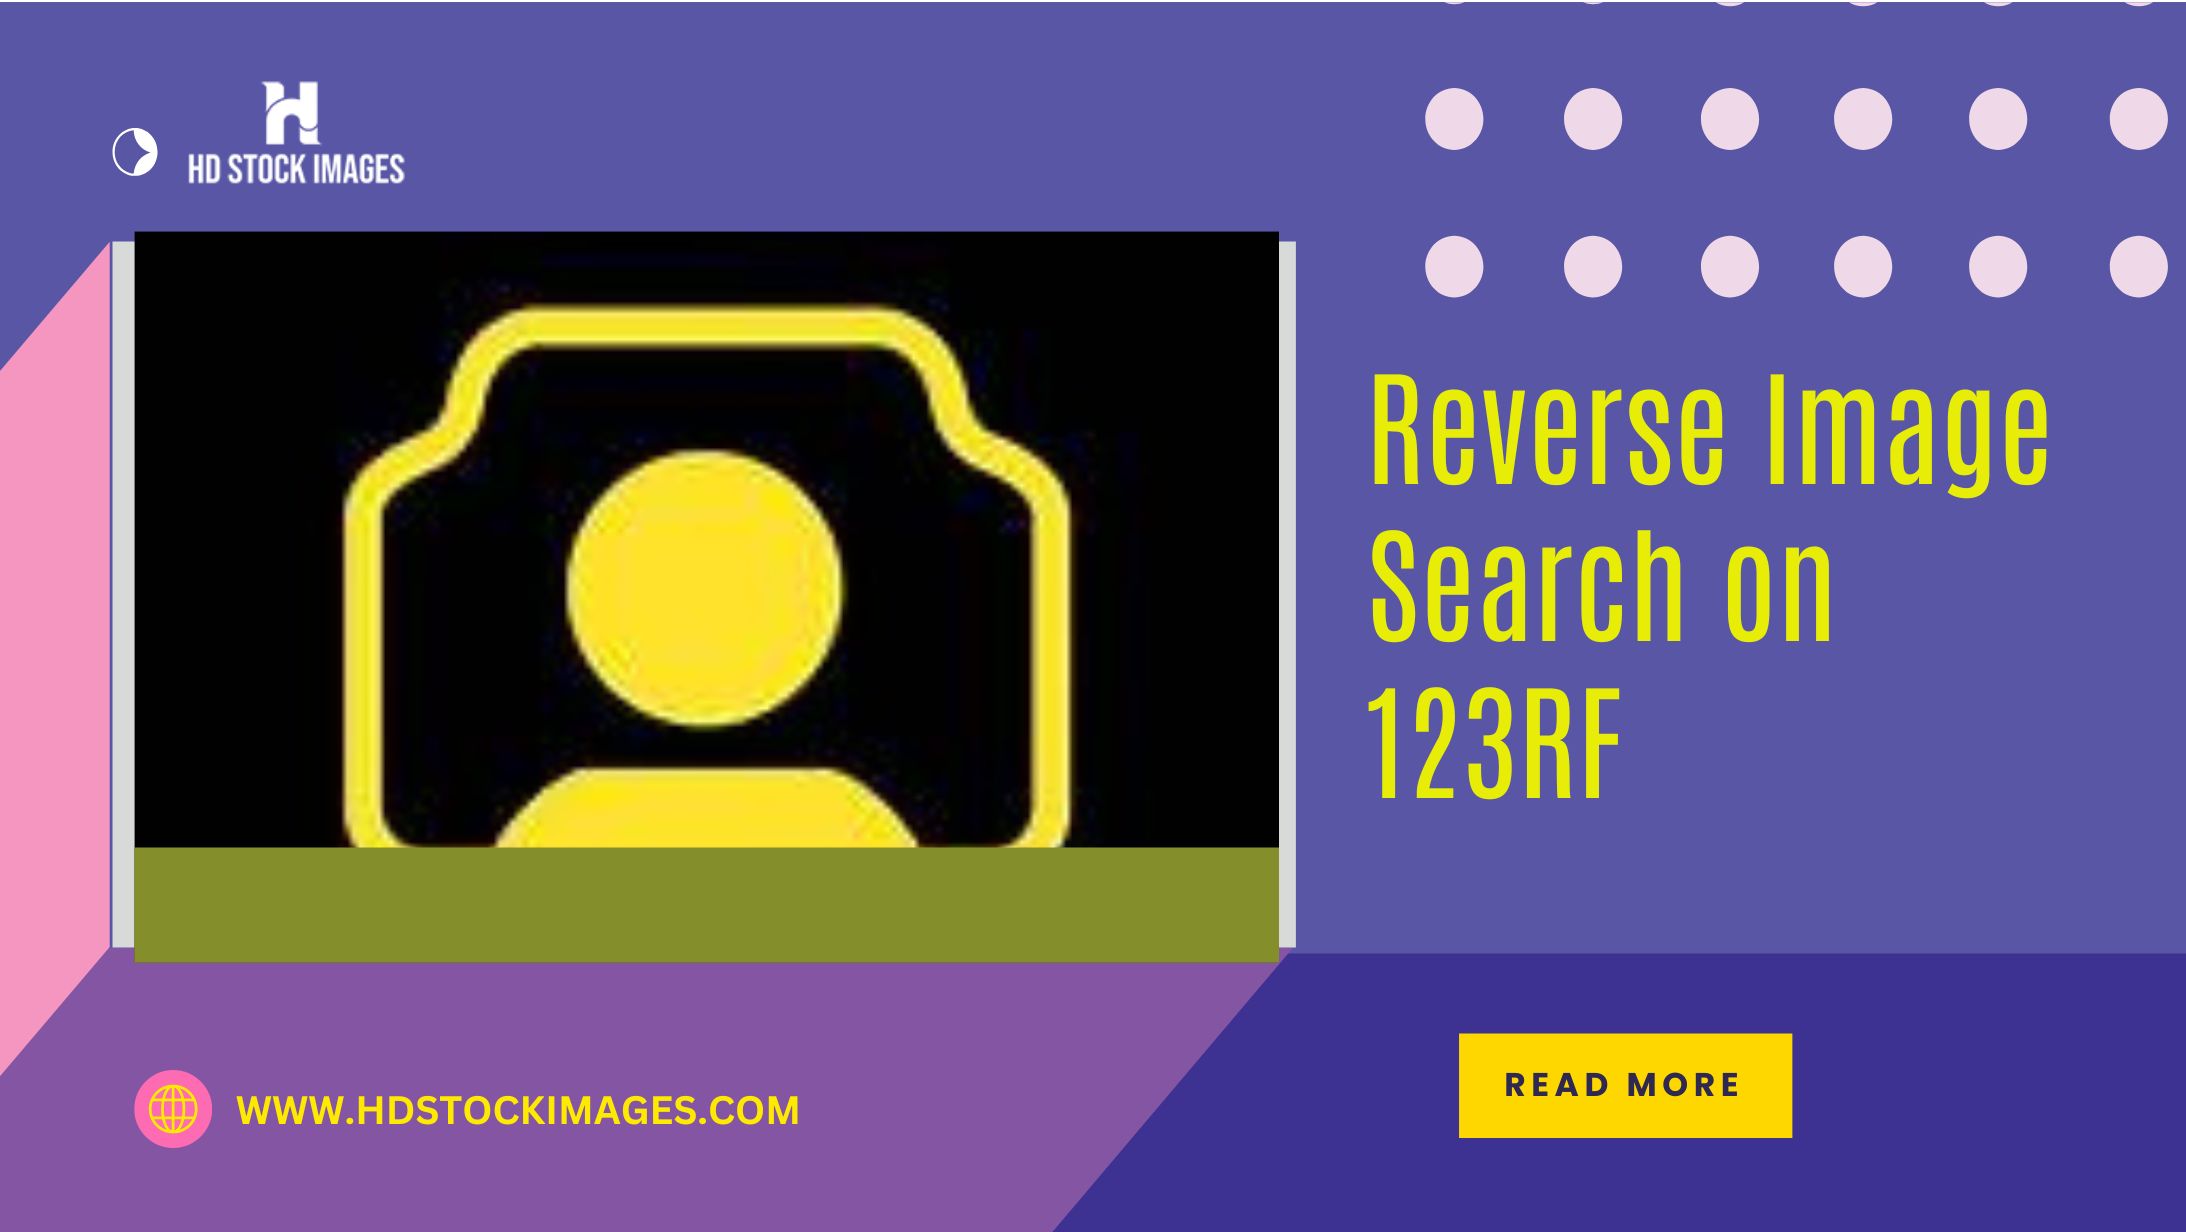 Reverse Image Search on 123RF: Discover Similar or Identical Images